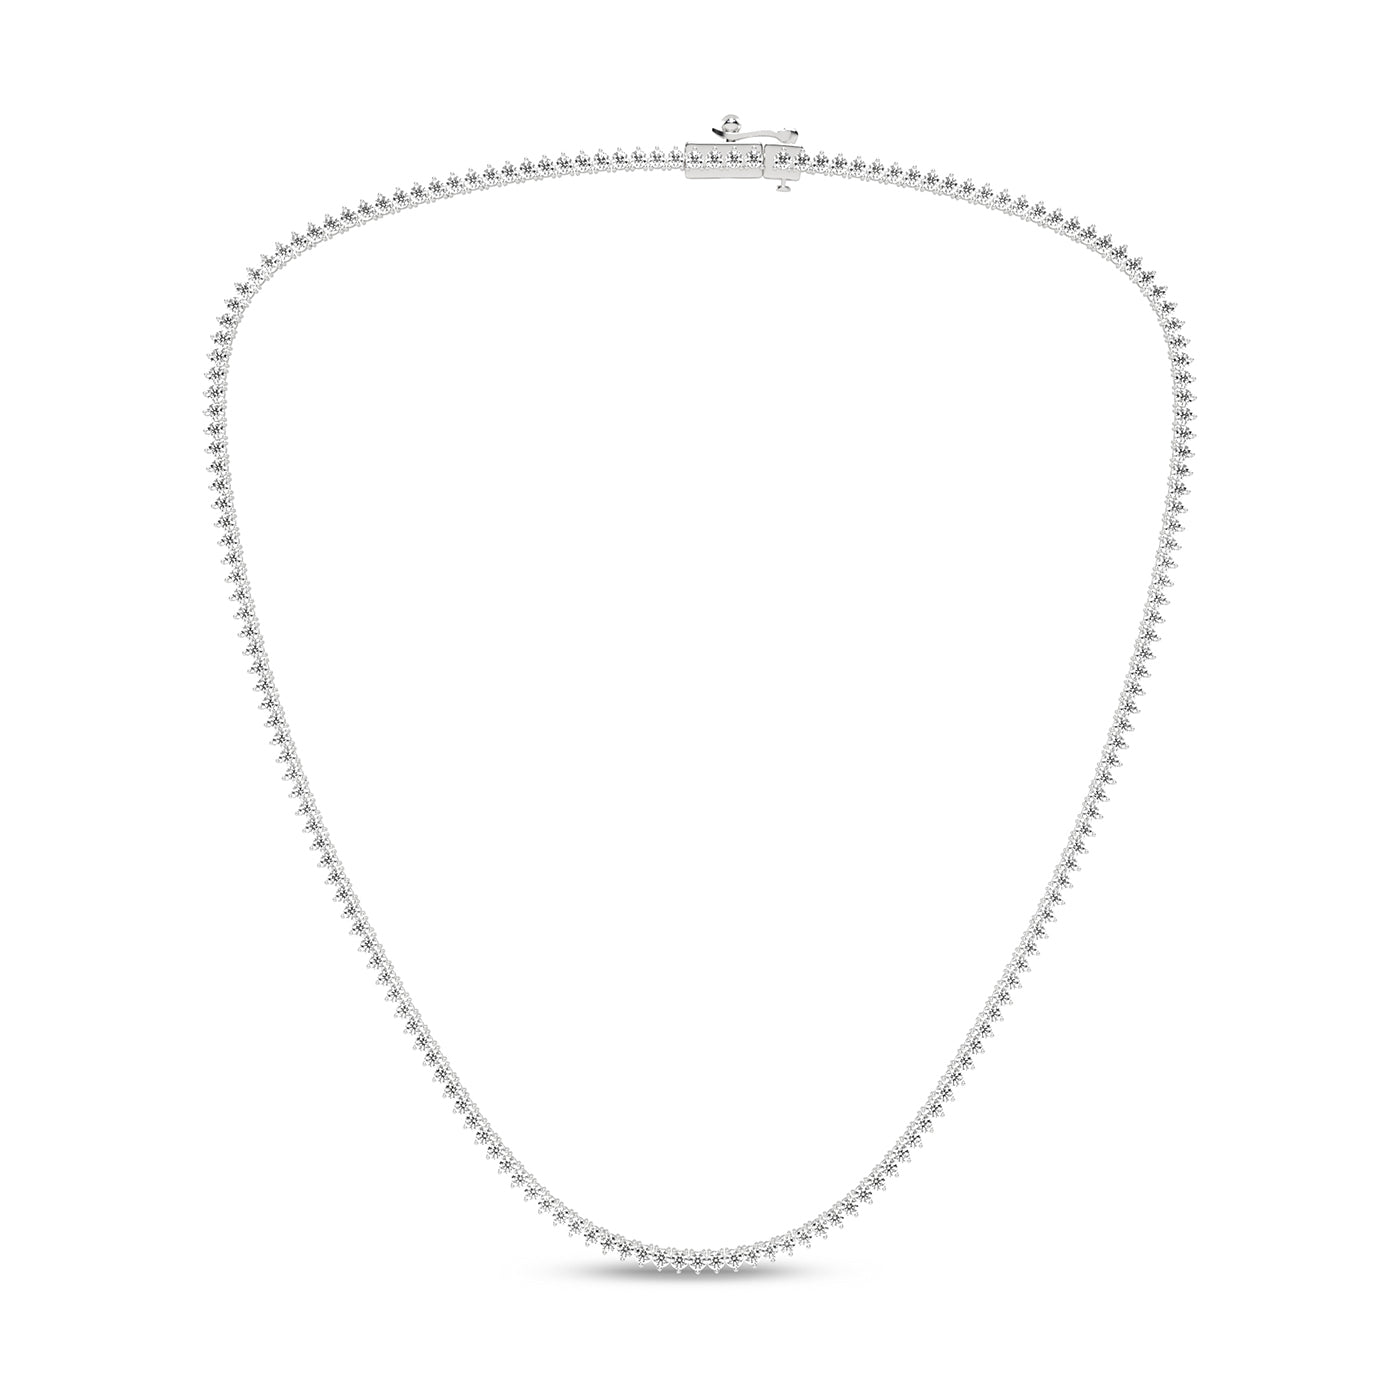 Graduated Atmos Tennis Necklace_Product Angle_PCP Main Image